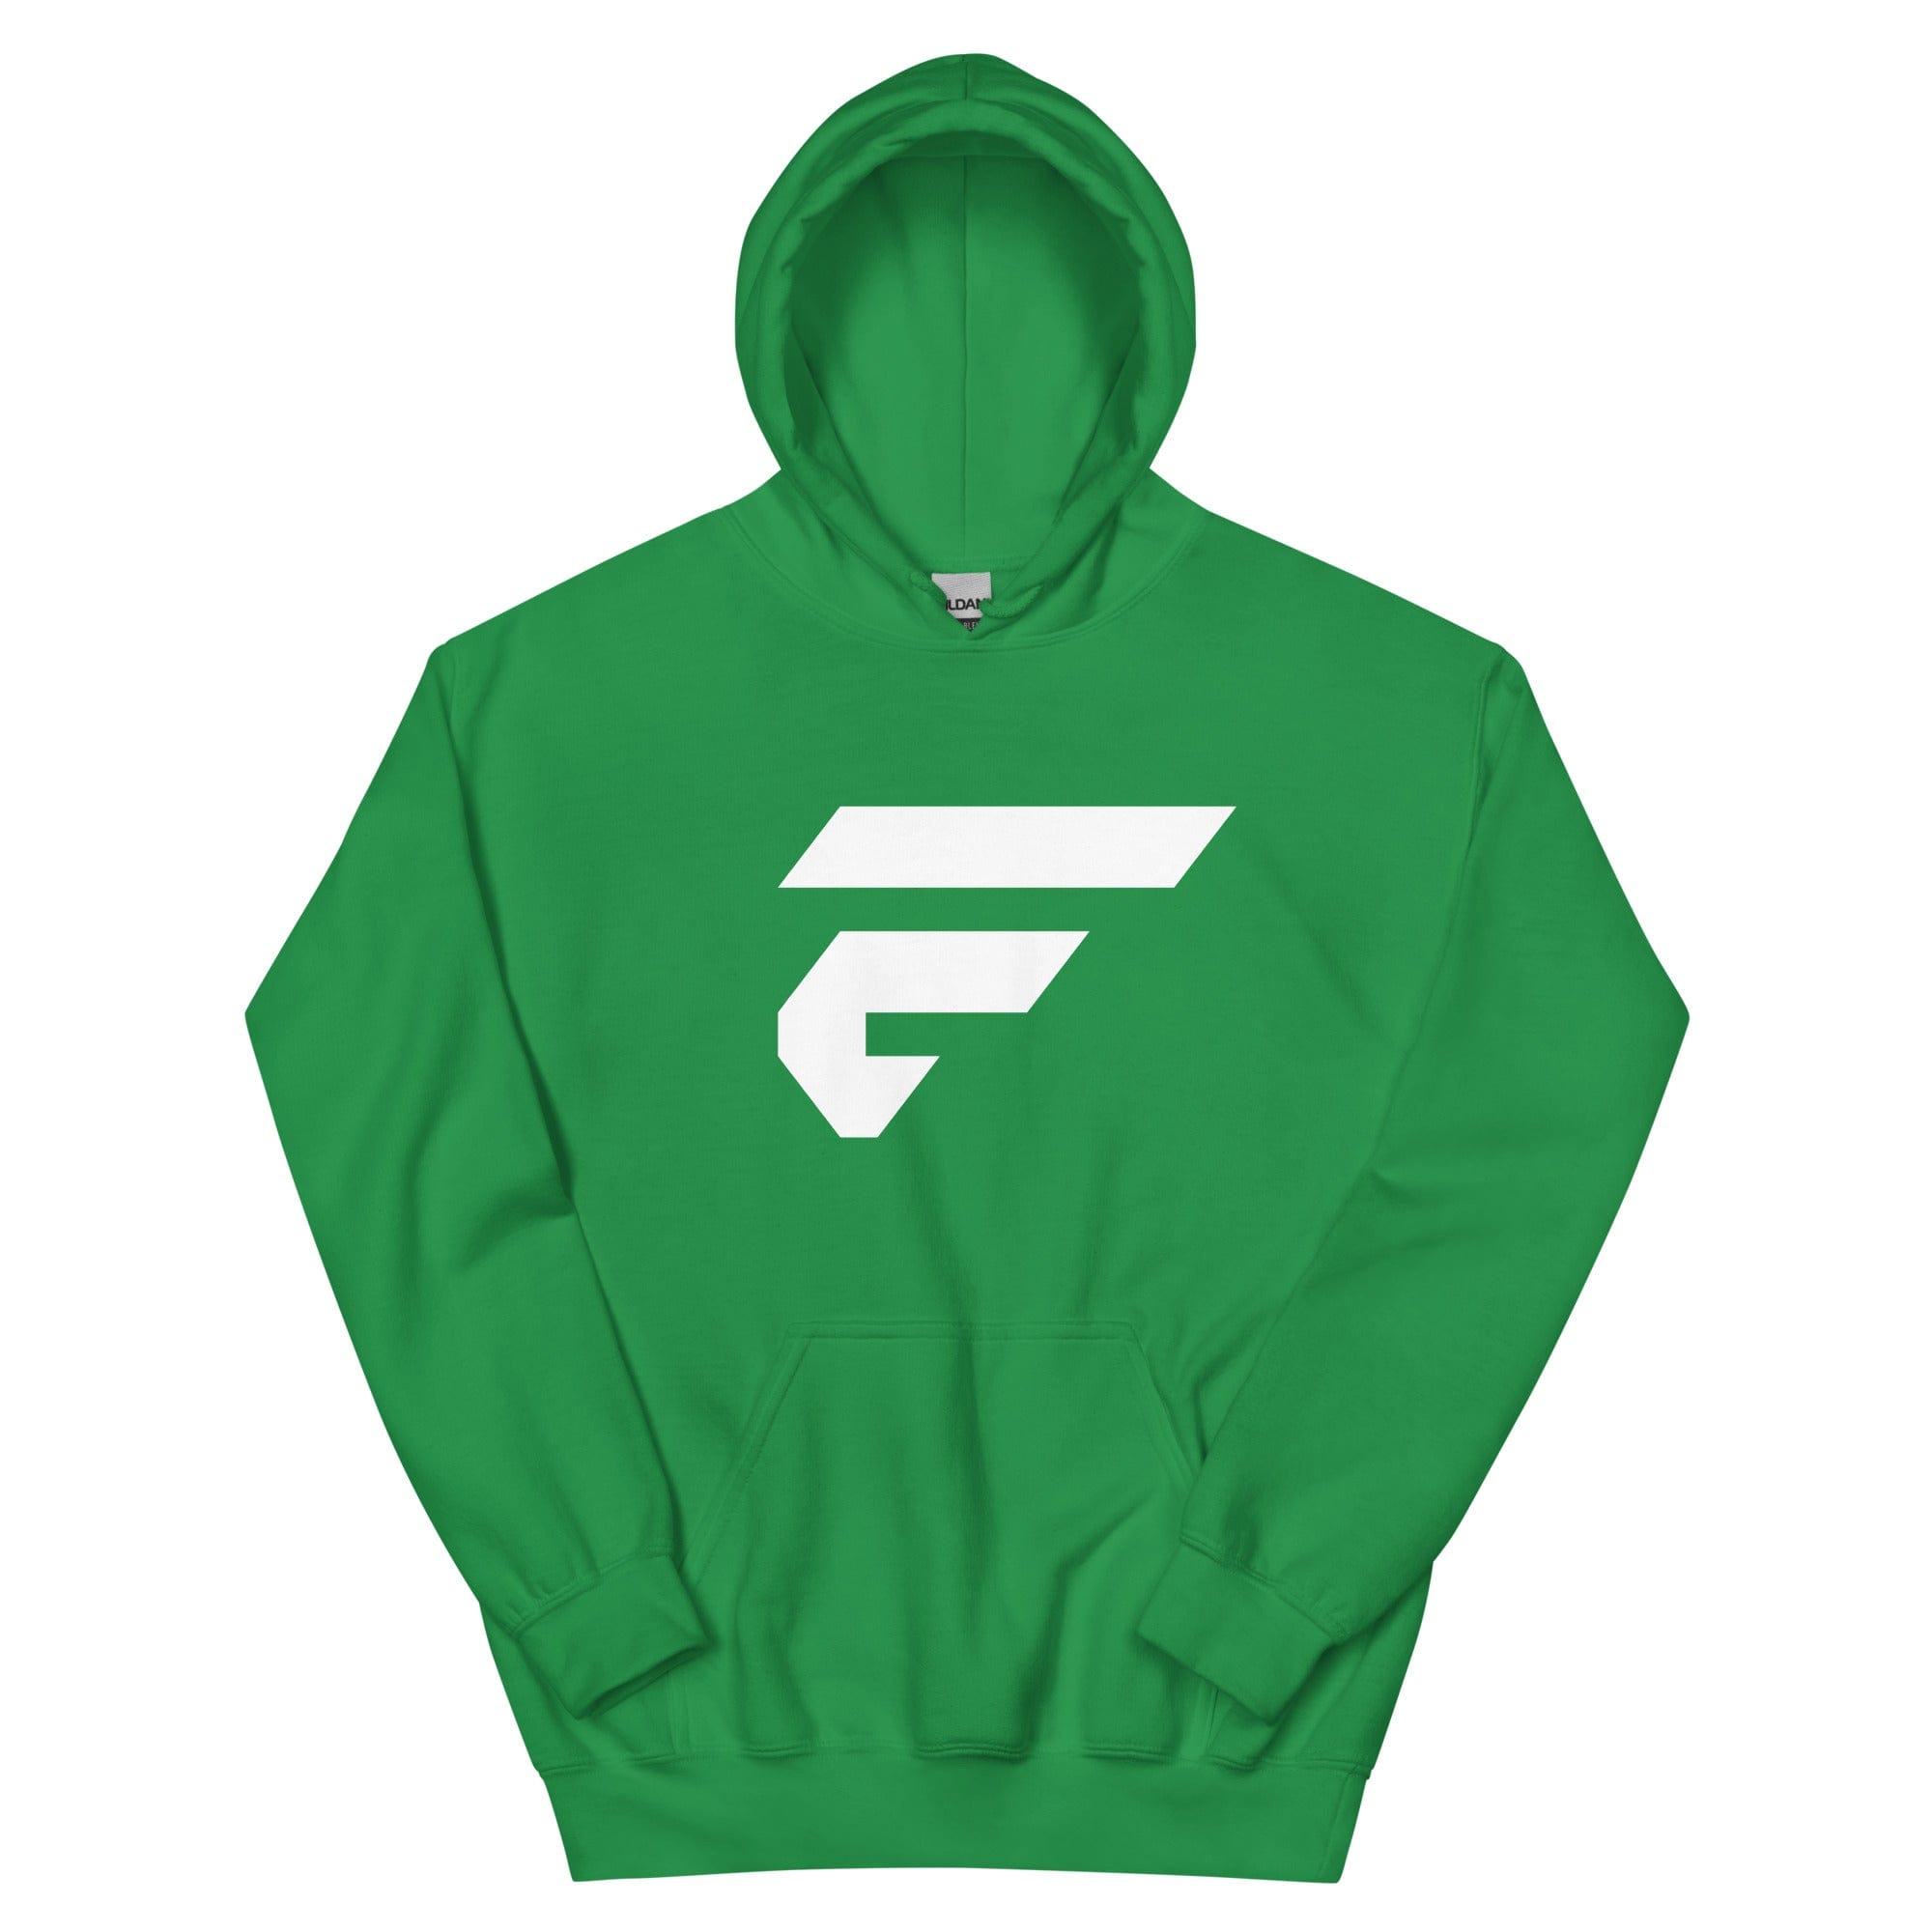 Green unisex cotton hoodie with Fire Cornhole F logo in white